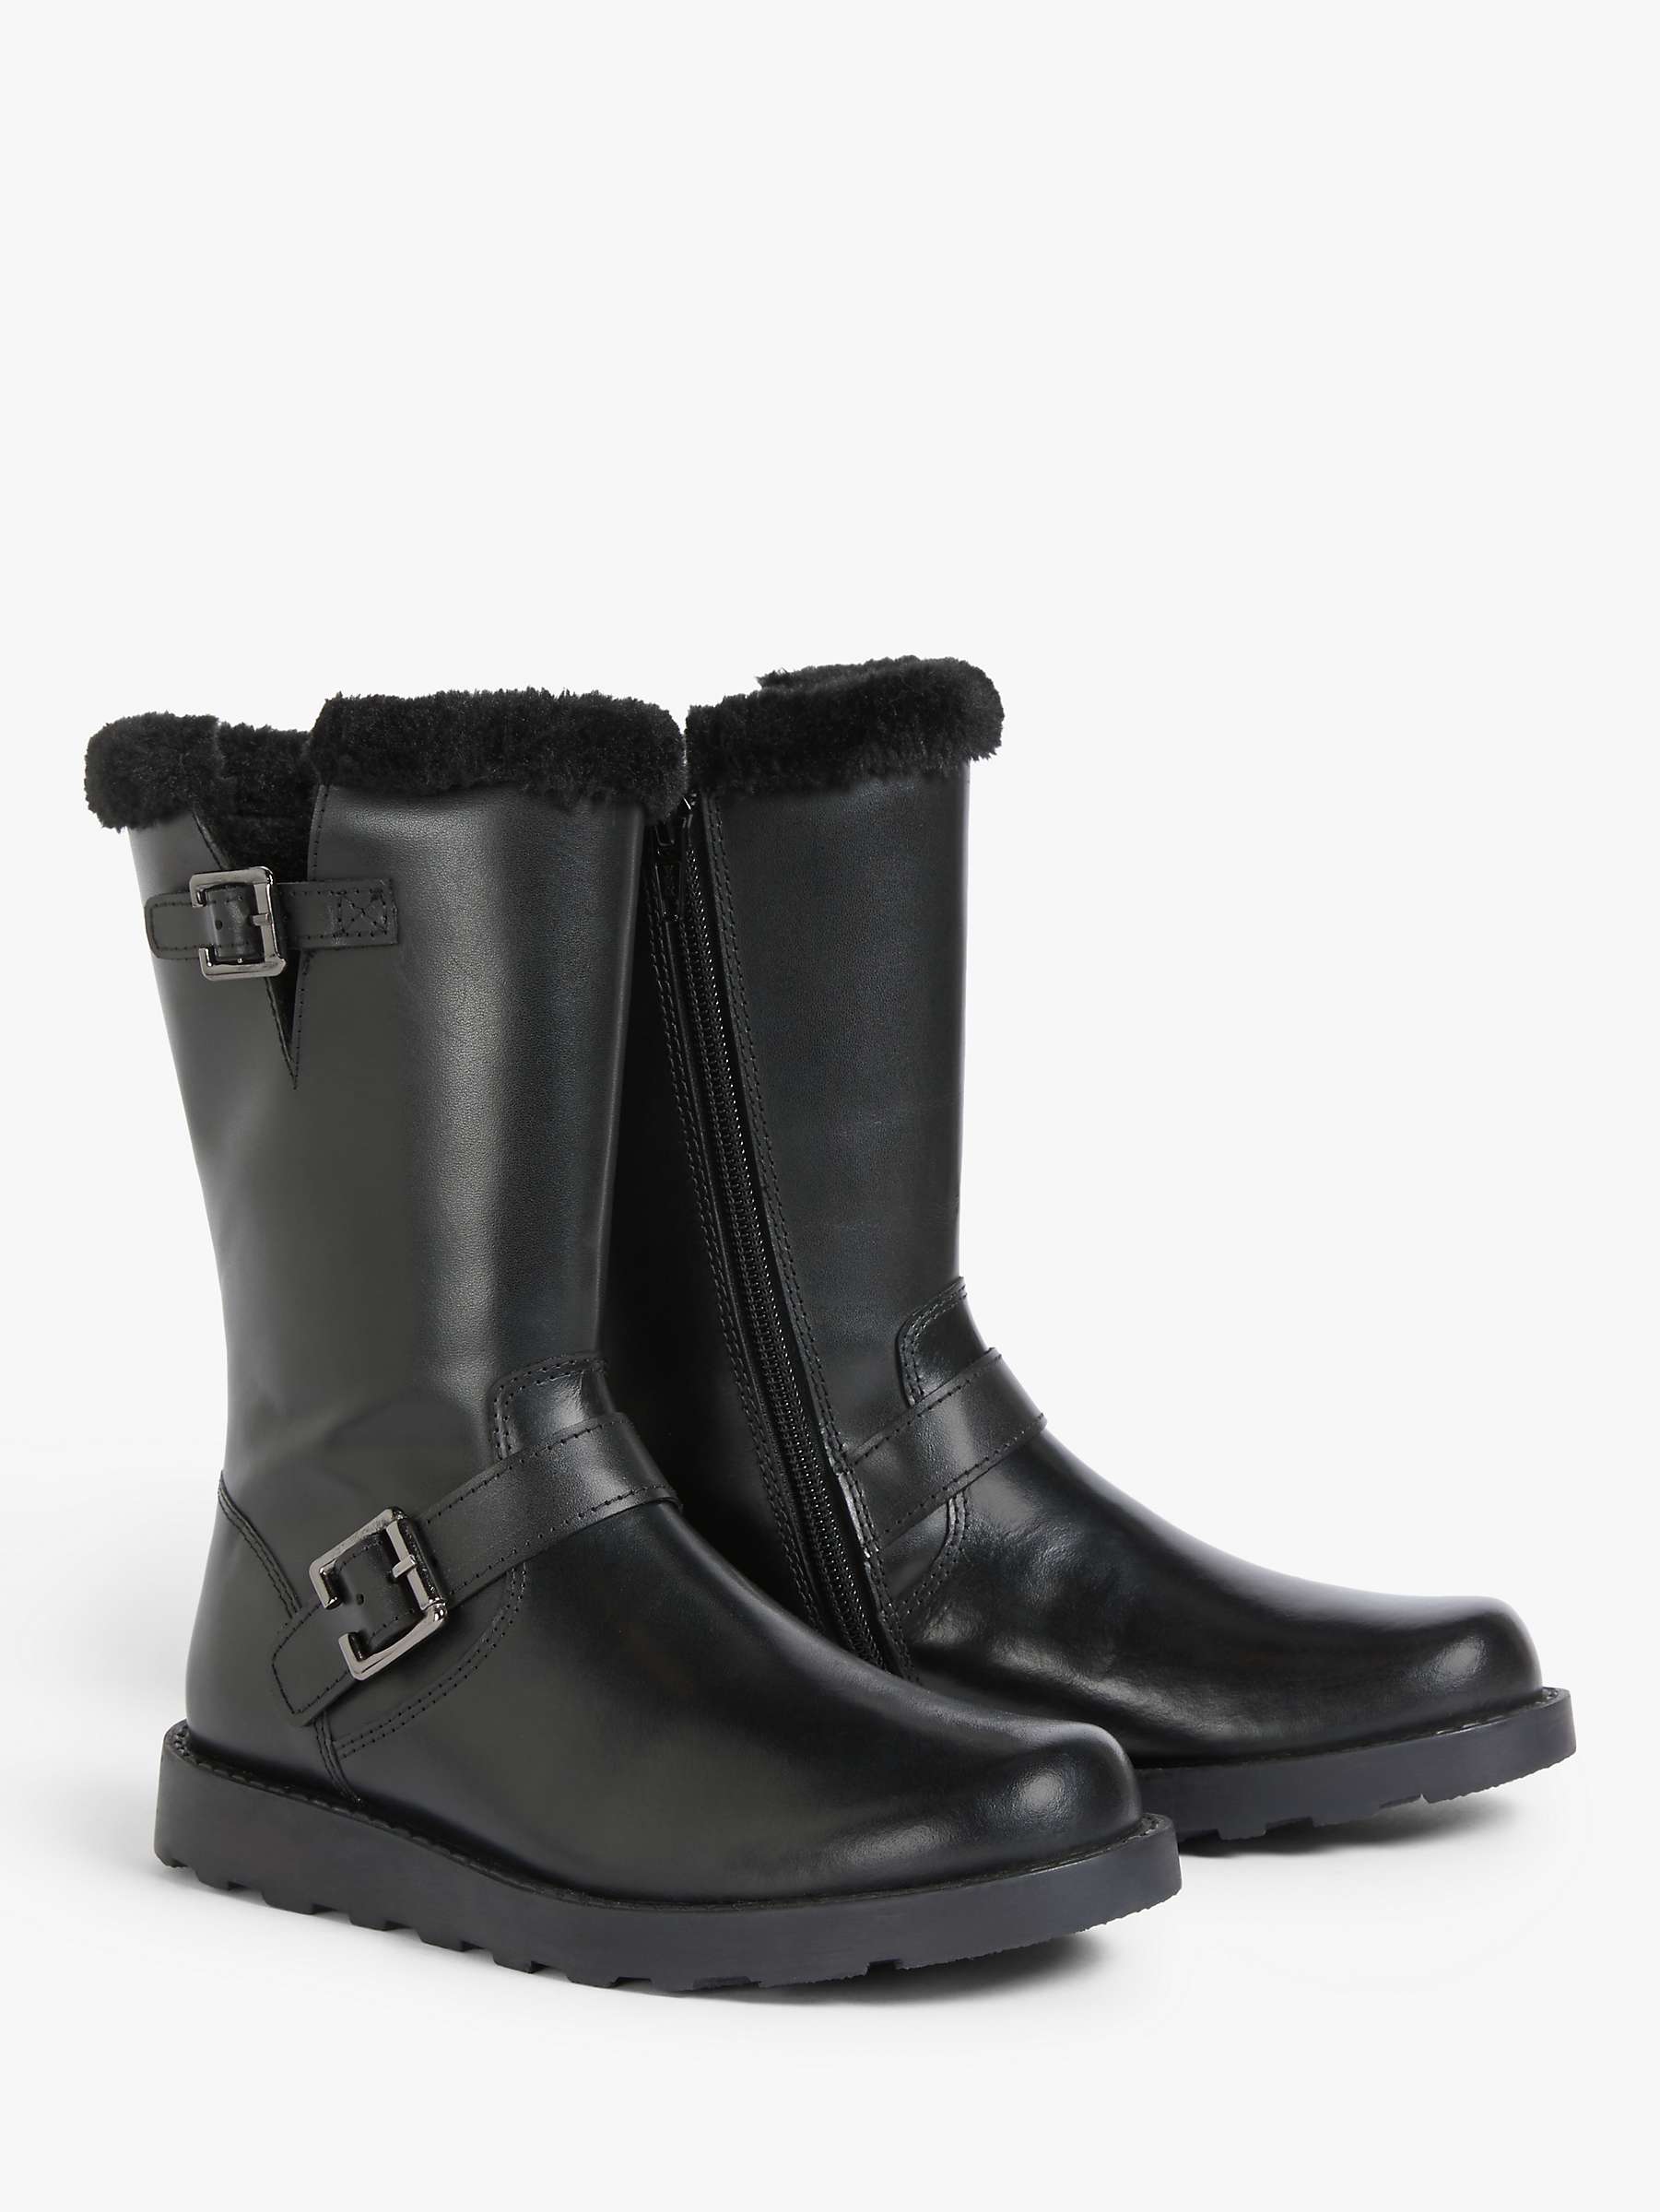 Buy John Lewis Kids' Leia Shearling Lined Boots Online at johnlewis.com